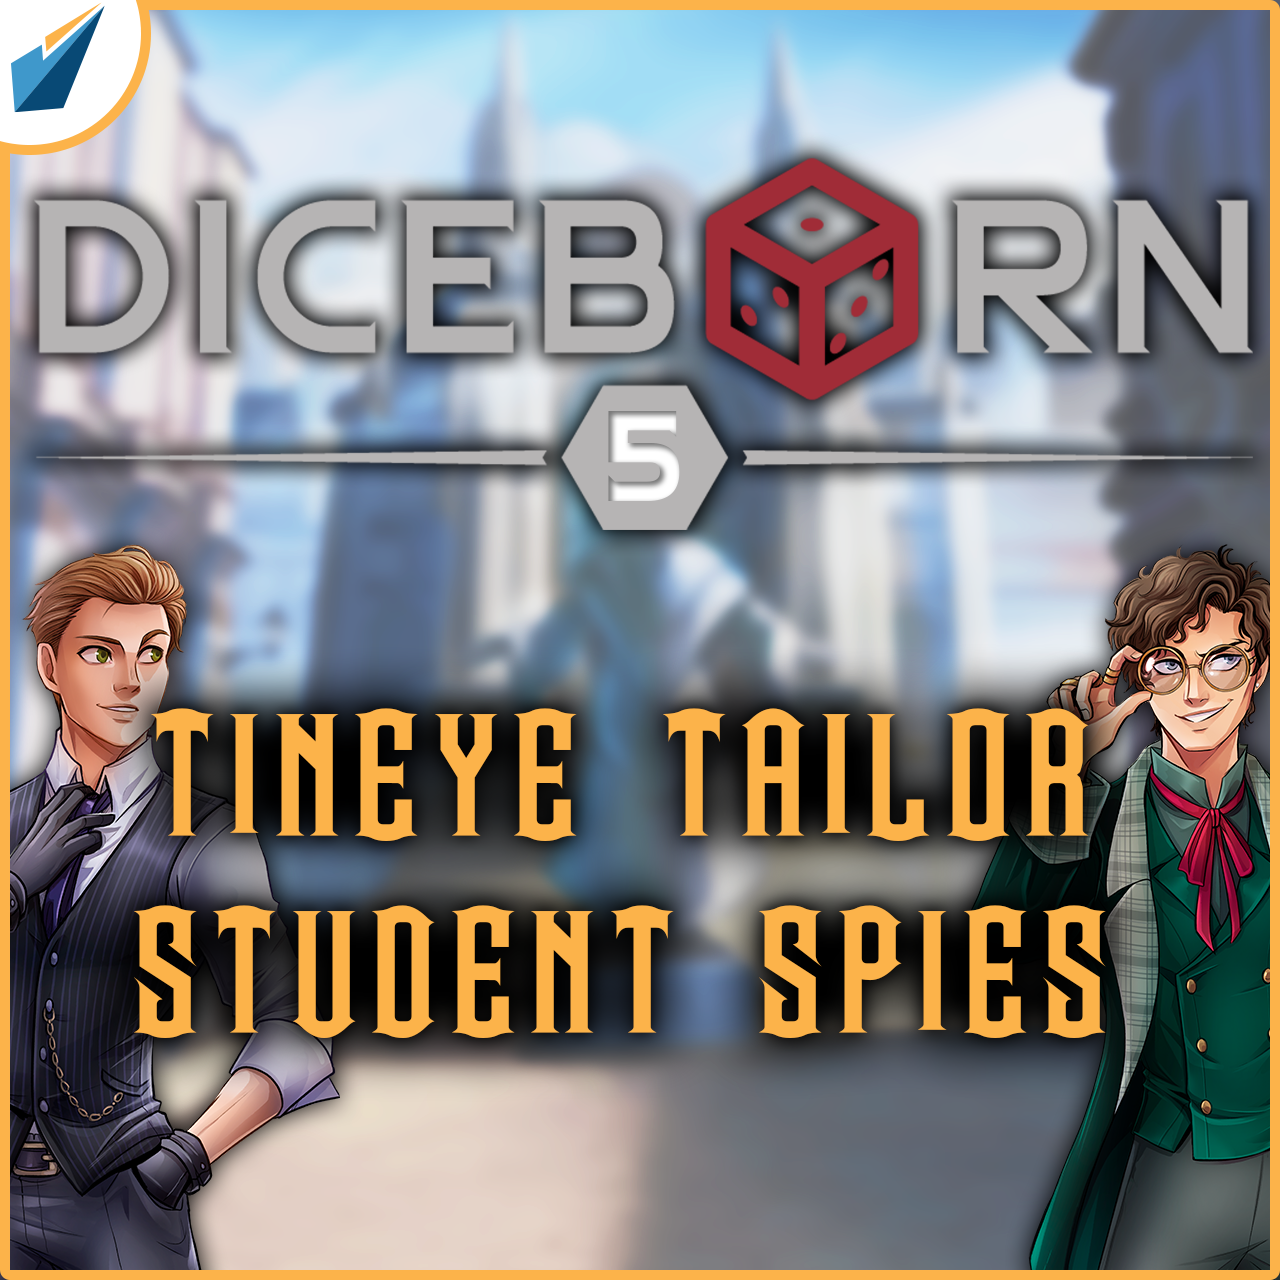 More information about "Diceborn: Episode 5 - Tineye Tailer Student Spies"